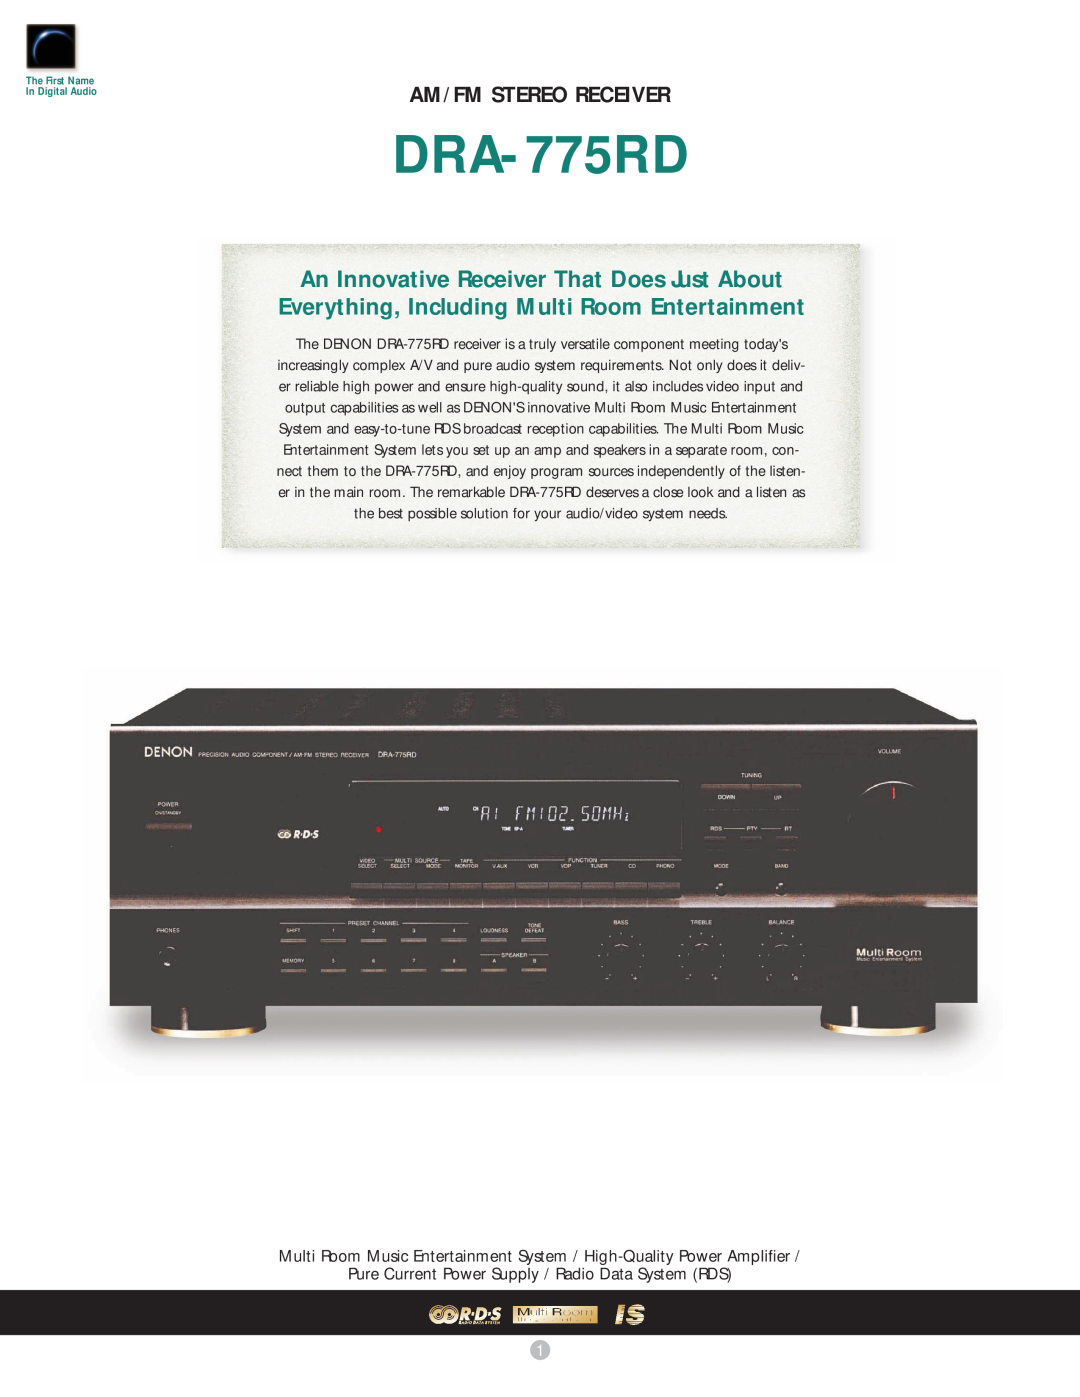 Denon DRA-775RD manual Am/Fm Stereo Receiver, Pure Current Power Supply / Radio Data System RDS 